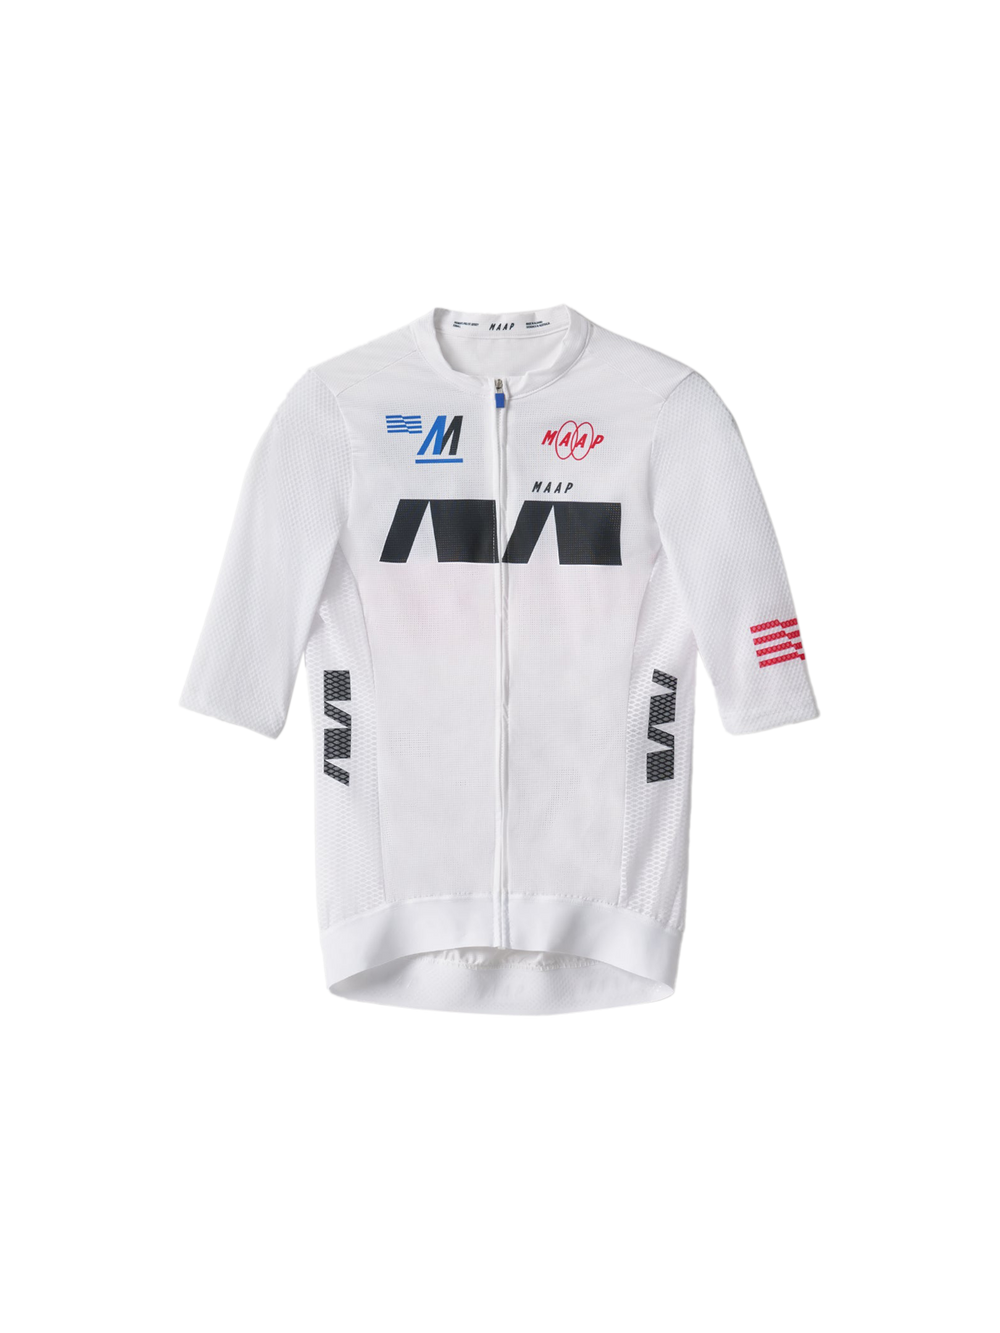 Product Image for Women's Trace Pro Air Jersey